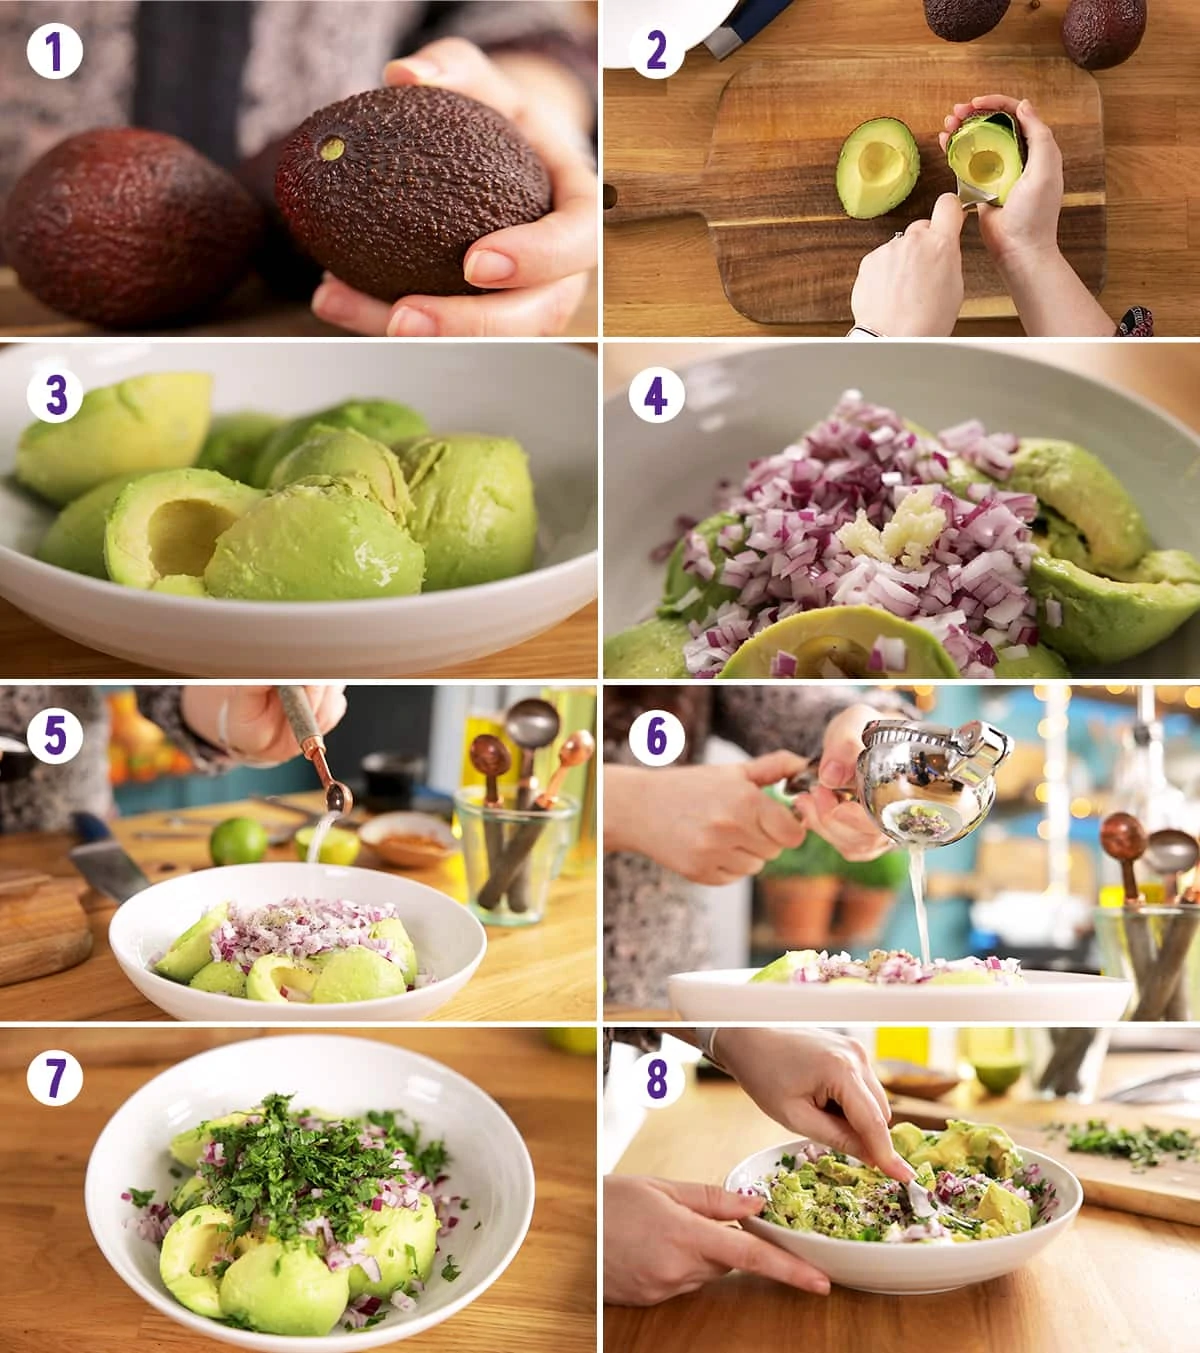 8 image collage showing the steps to make guacamole.